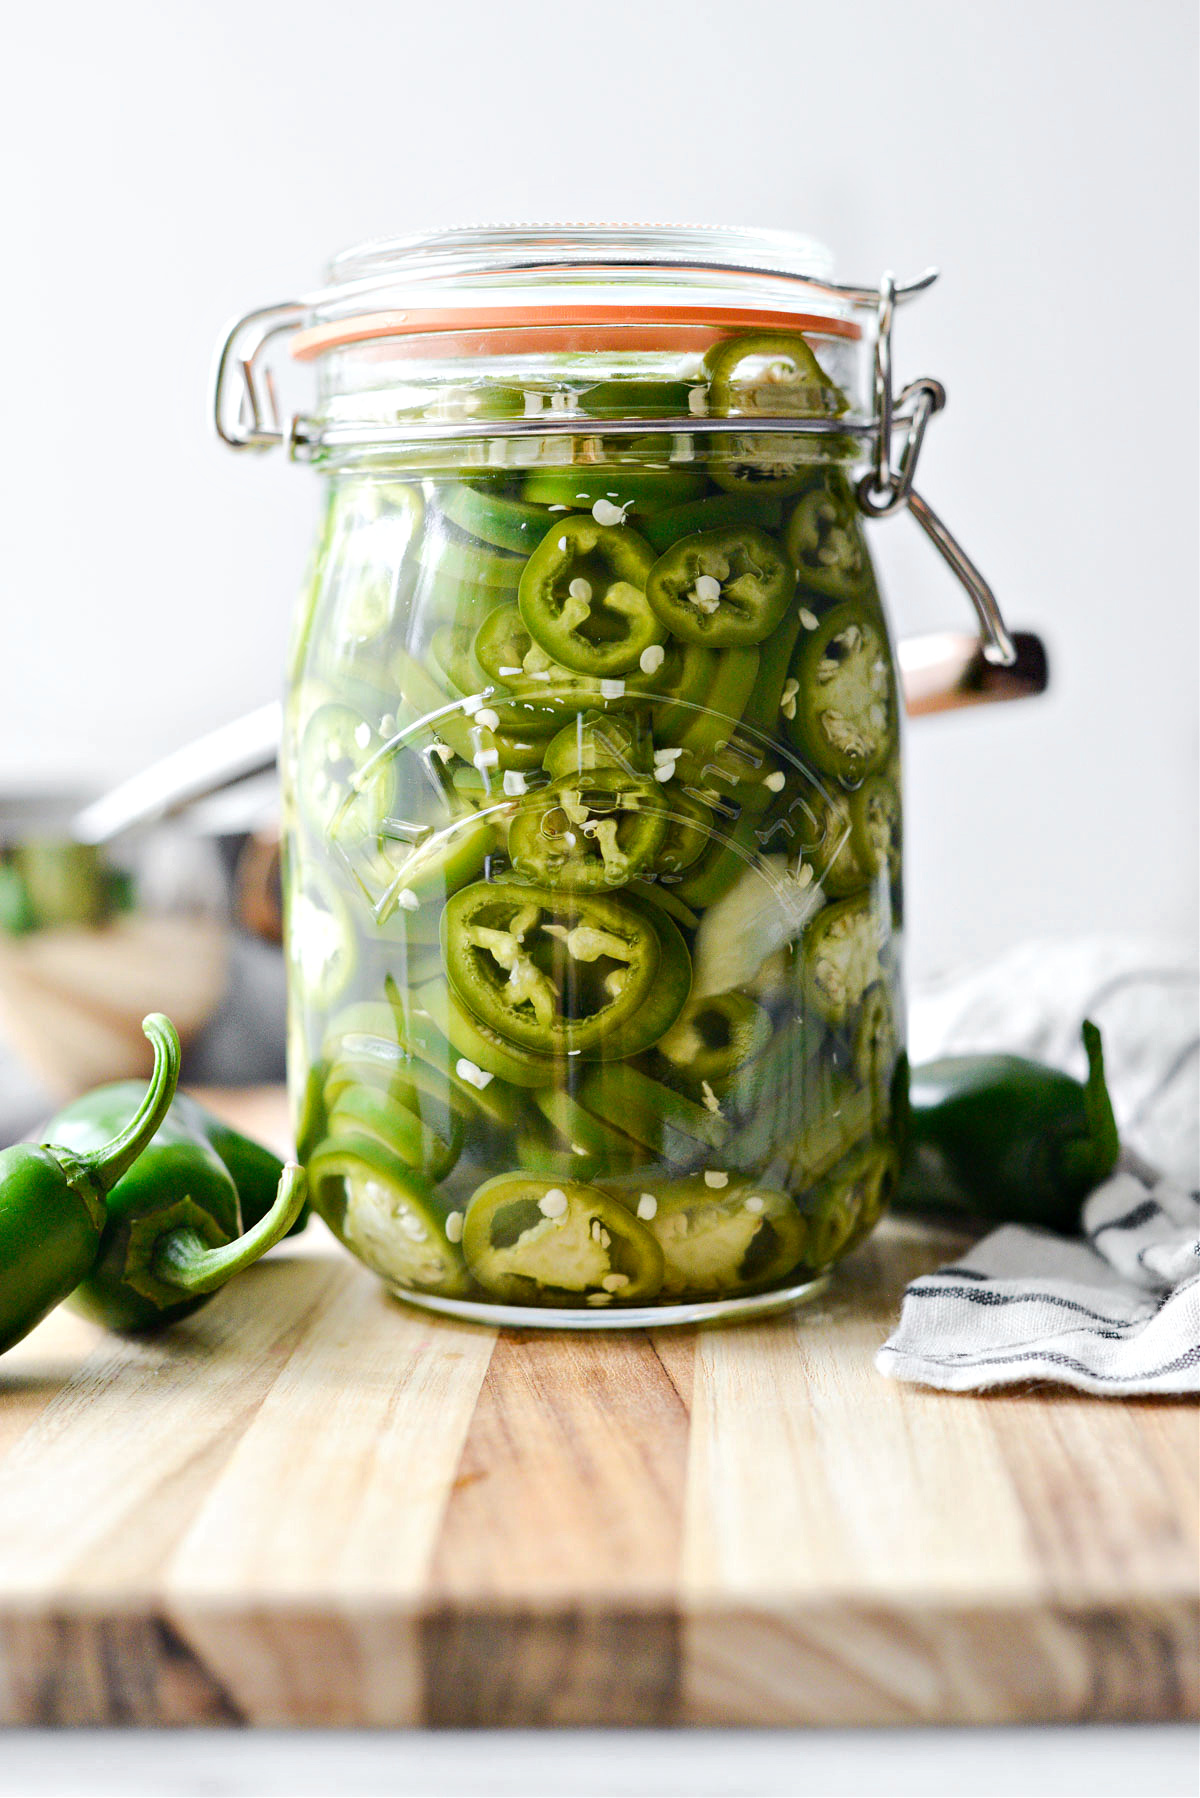 Dried Jalapeno Peppers - How to Dry Jalapeno Slices in Oven